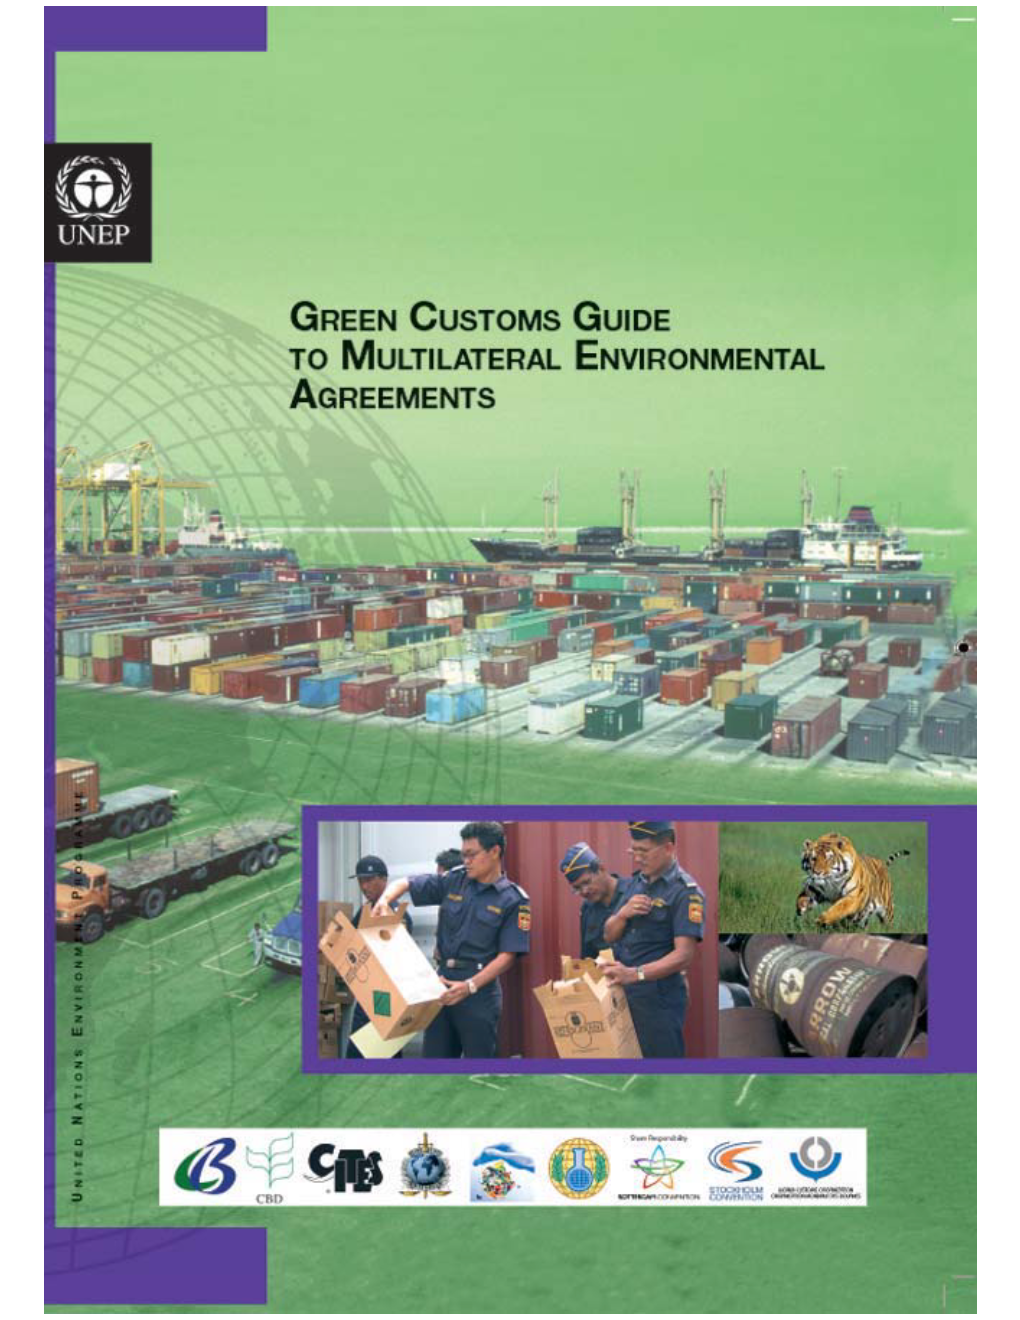 GREEN CUSTOMS GUIDE to Multilateral Environmental Agreements